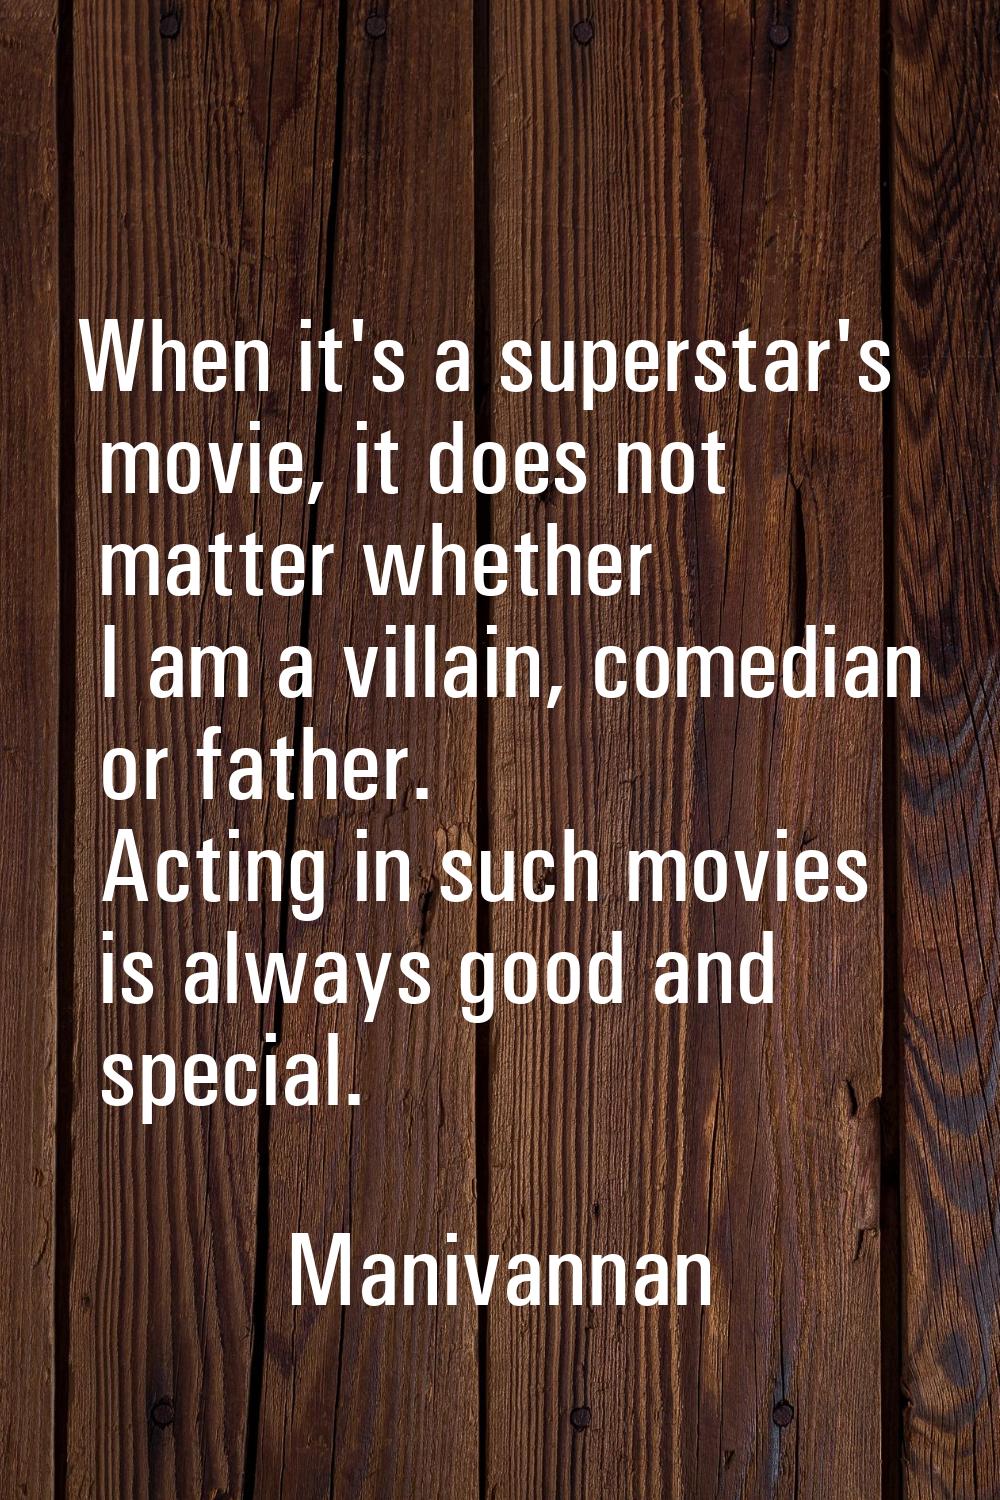 When it's a superstar's movie, it does not matter whether I am a villain, comedian or father. Actin